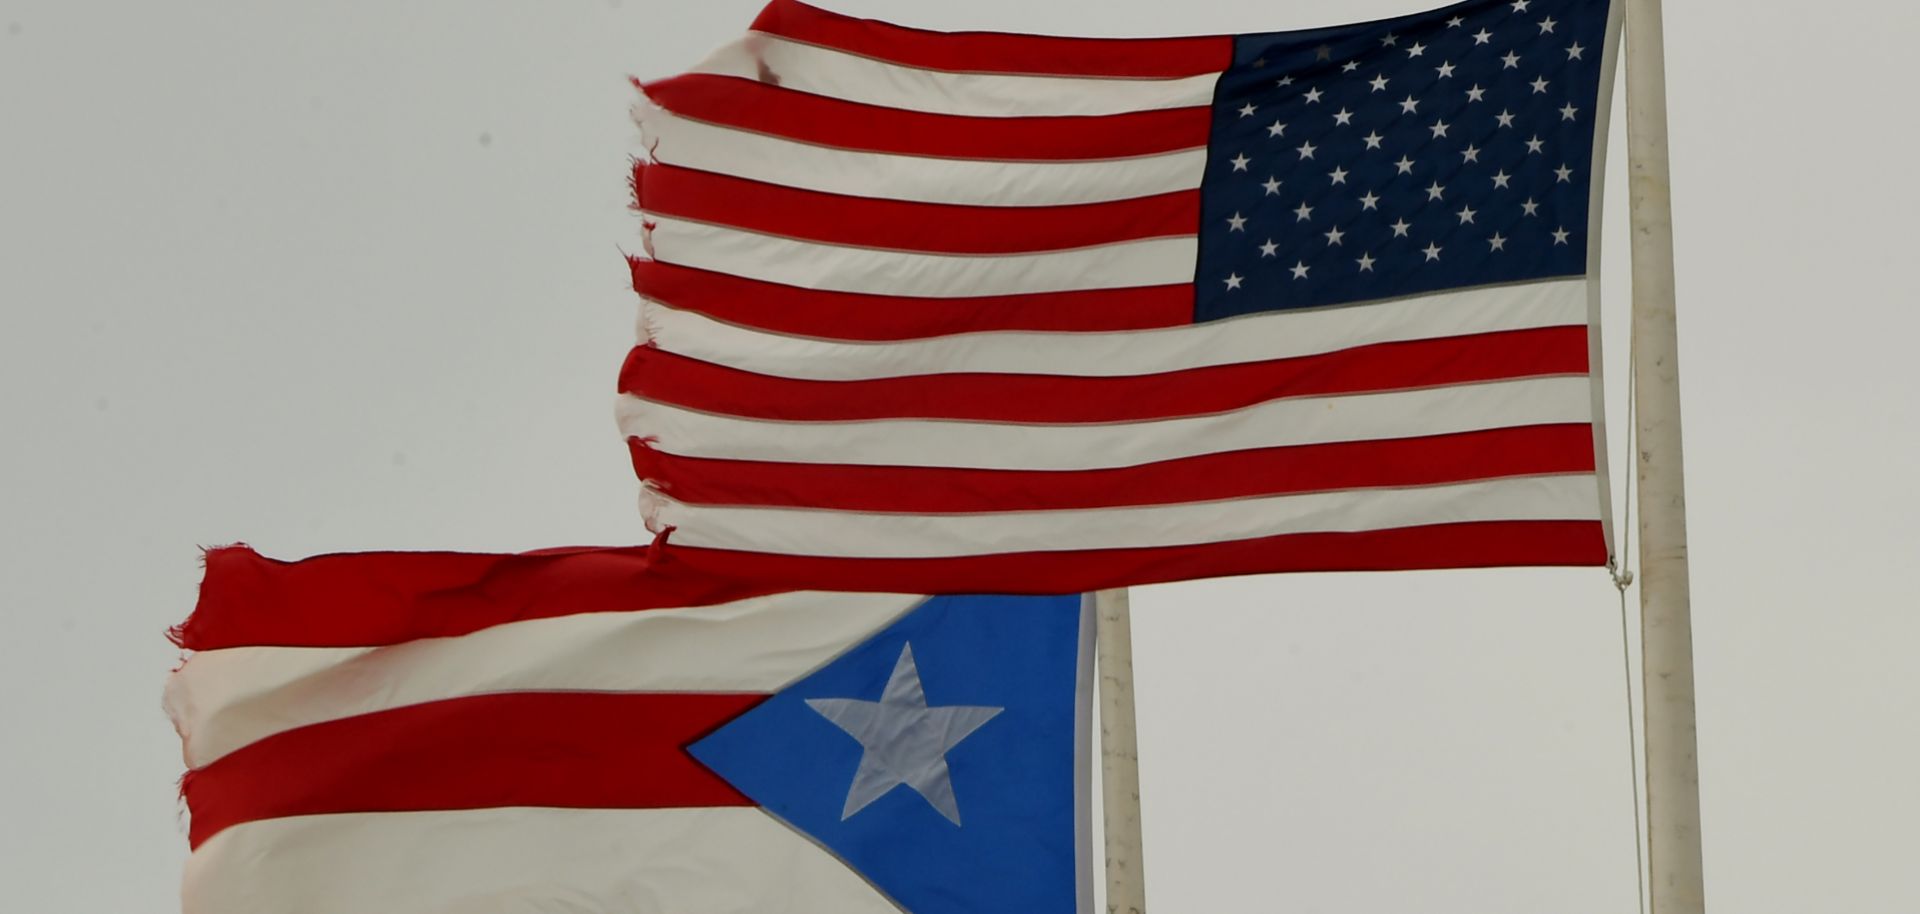 Americans Continue to Support Puerto Rico Statehood